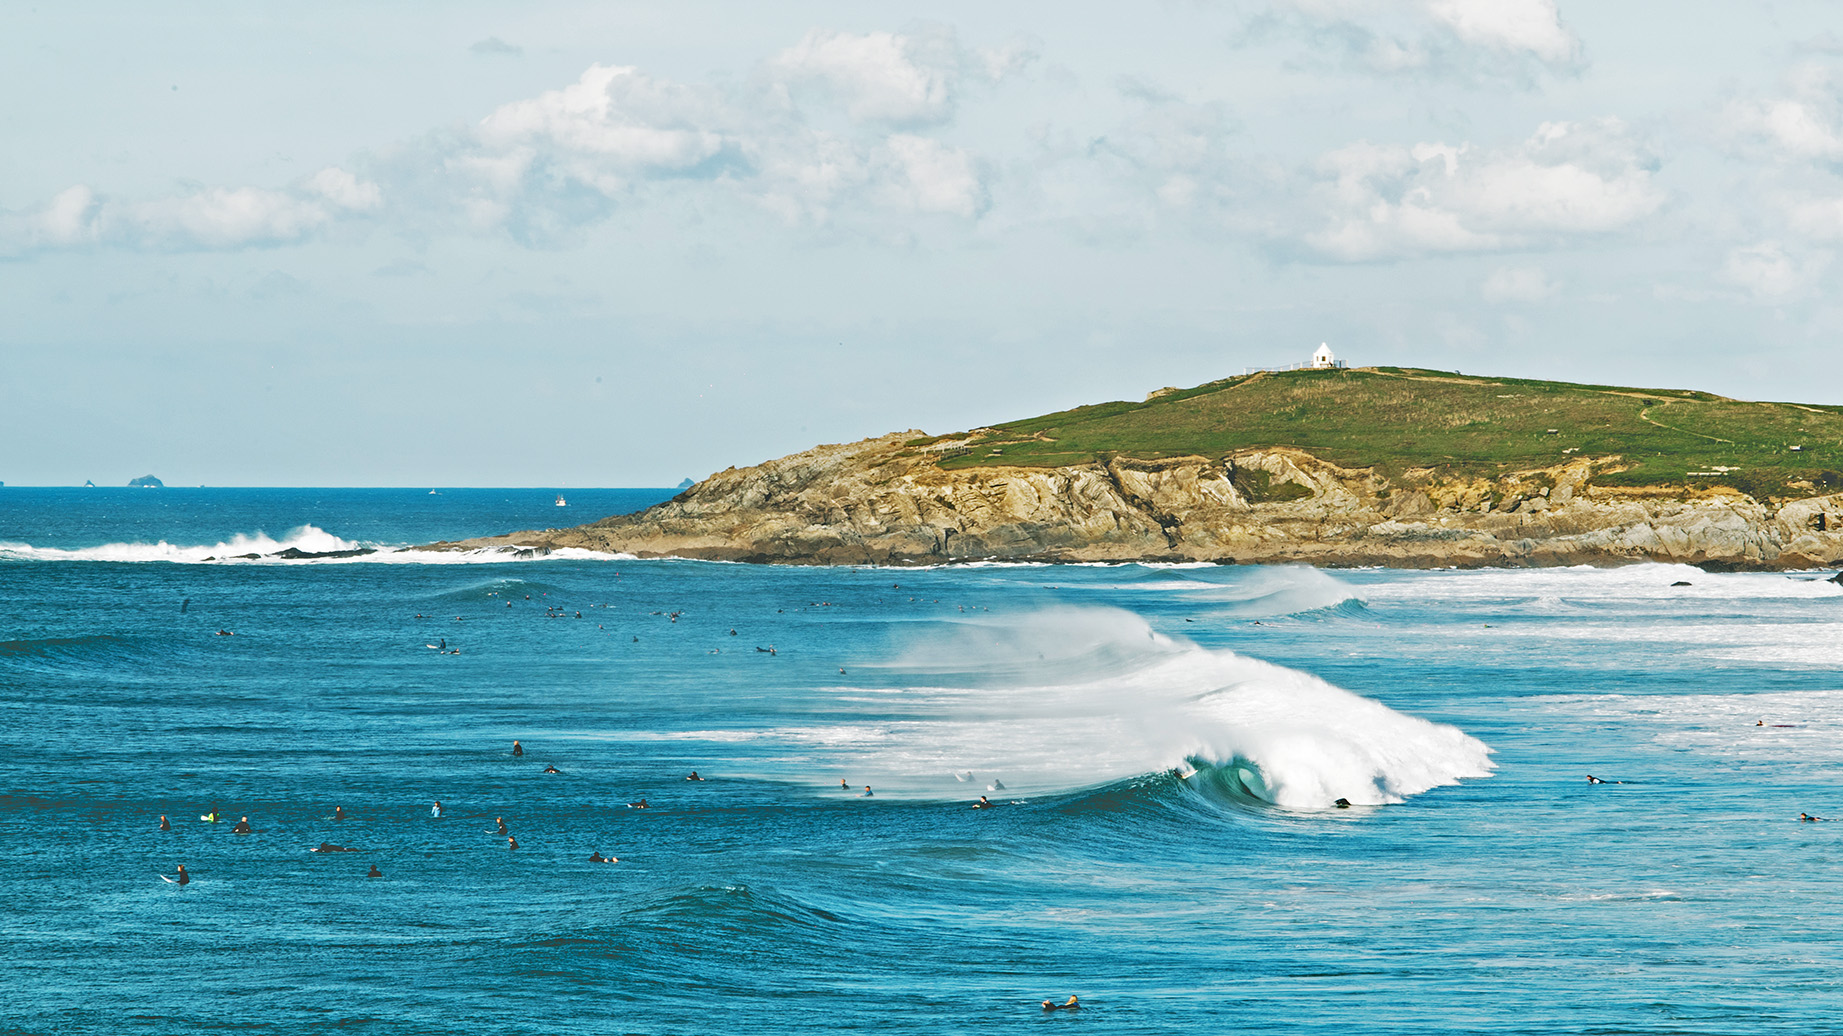 Fistral beach is a paradise for surfers